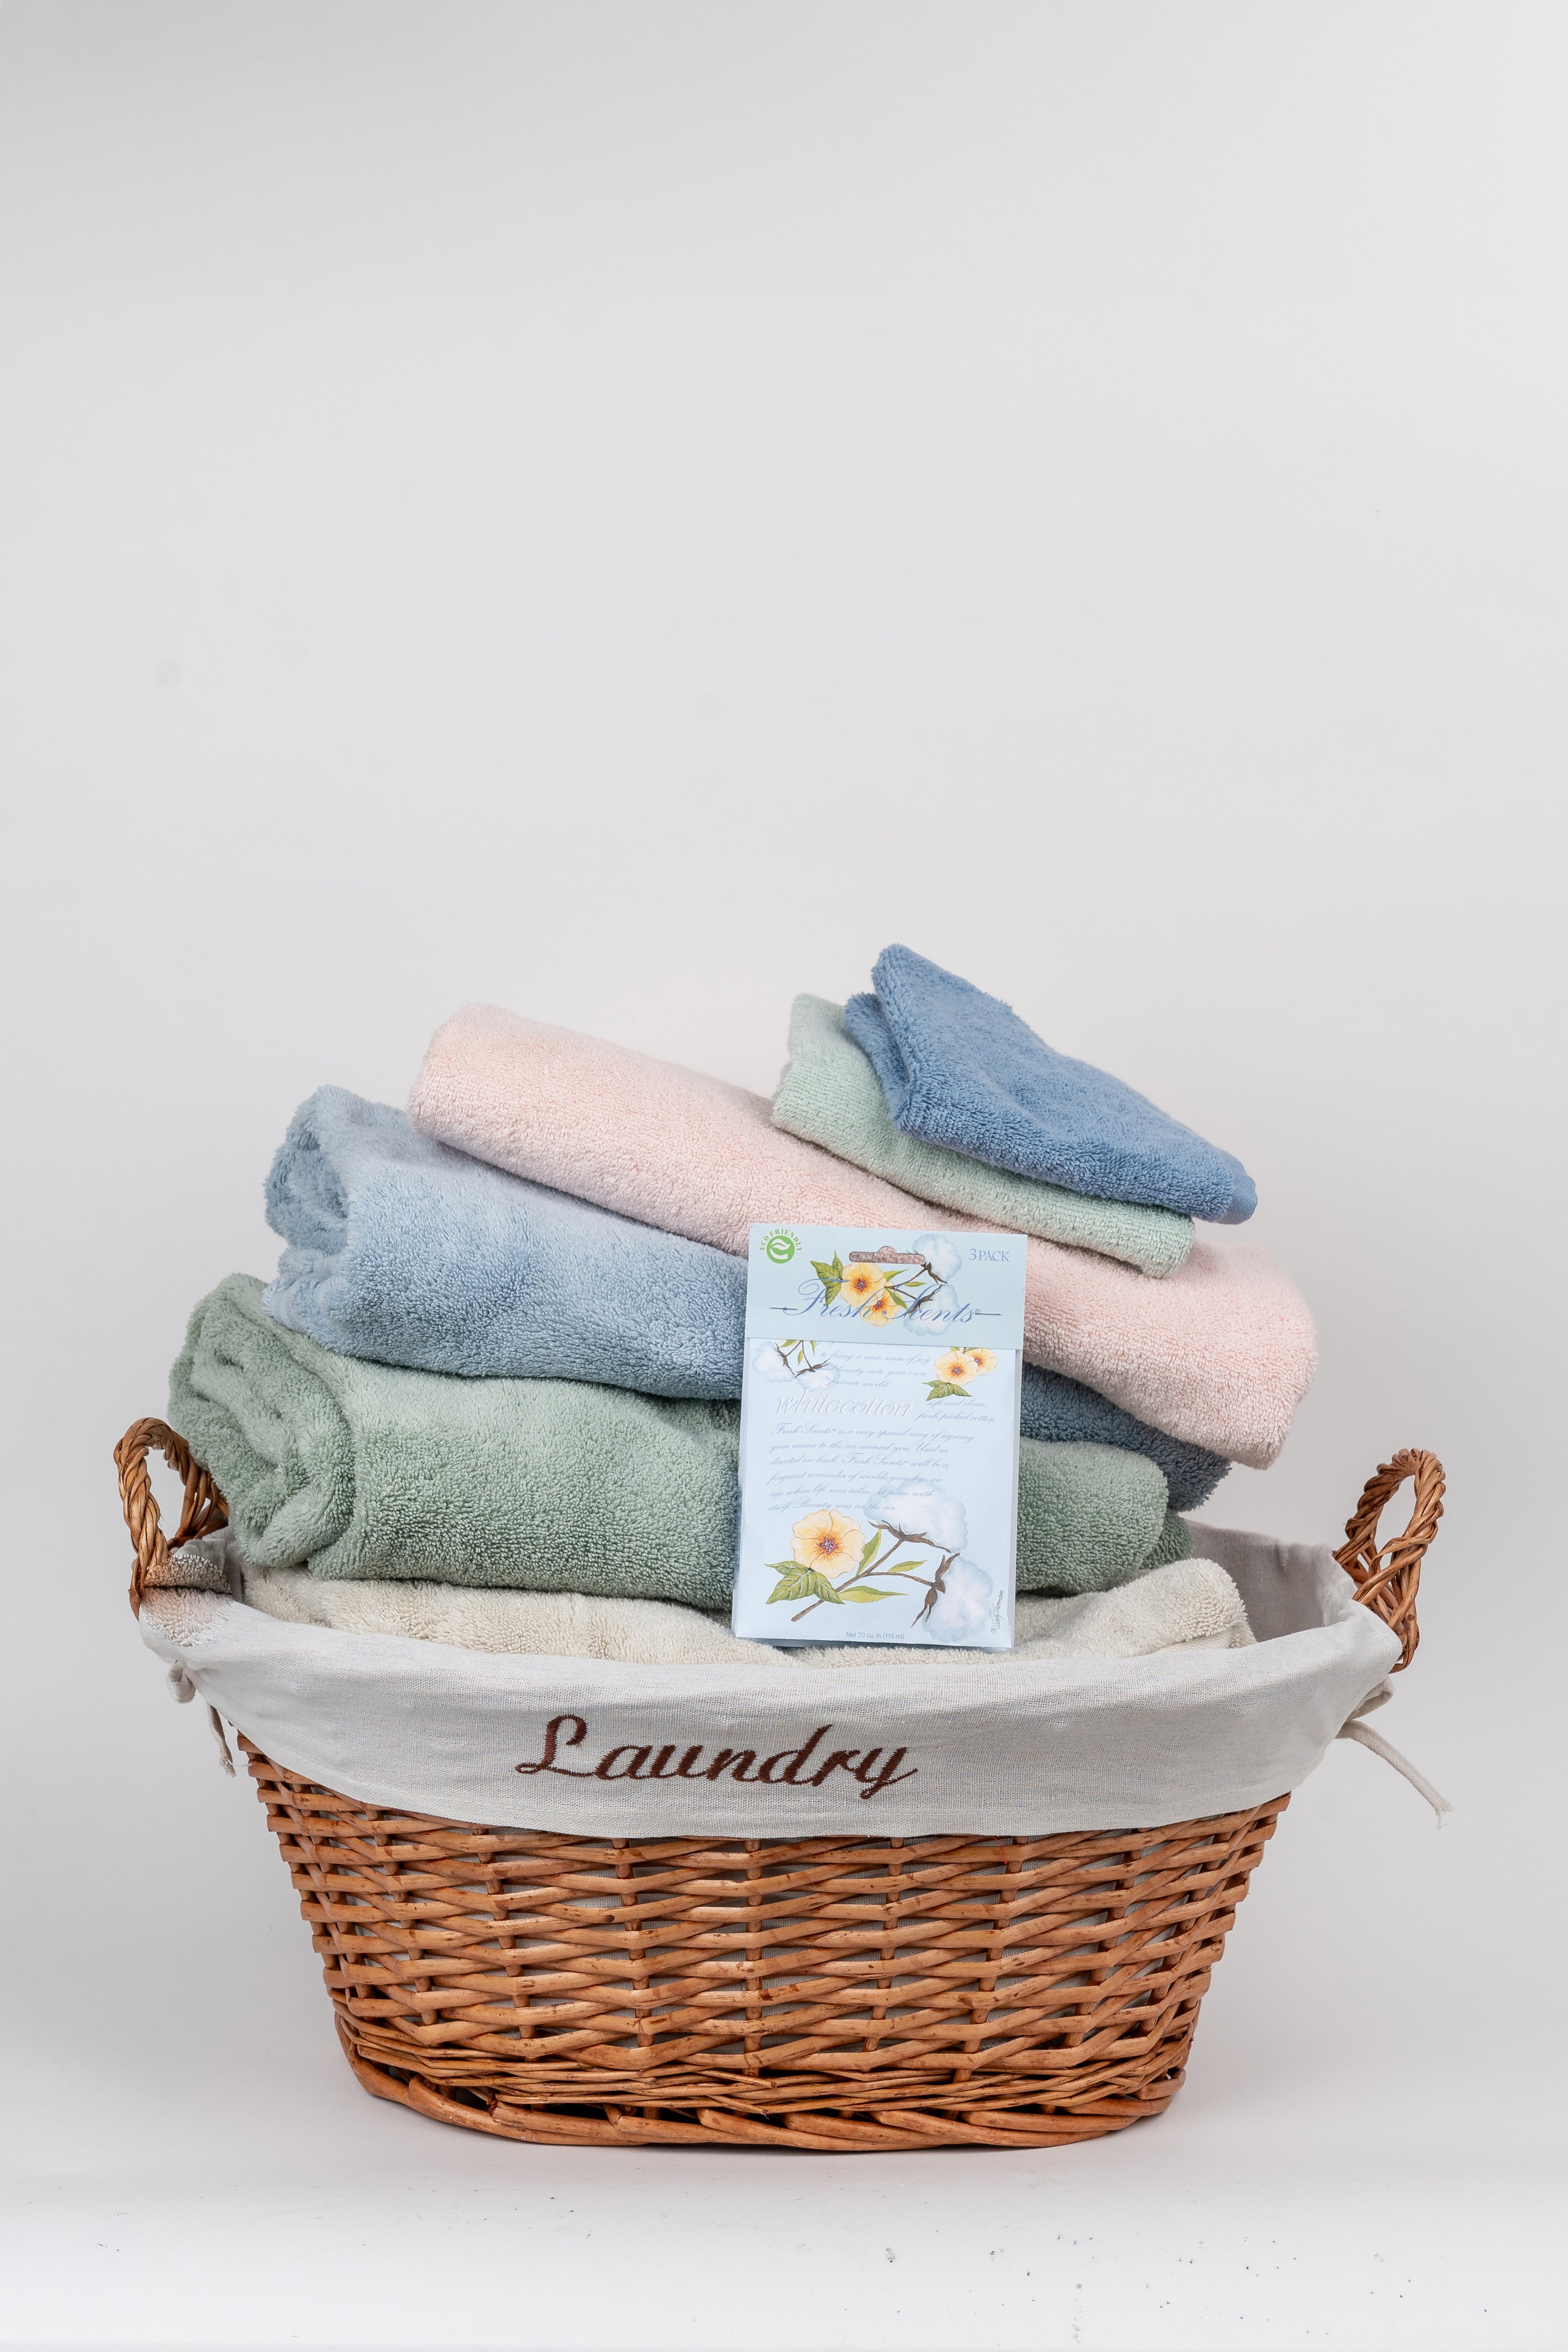 Scented White Cotton Sachet on Basket of Clean Towels